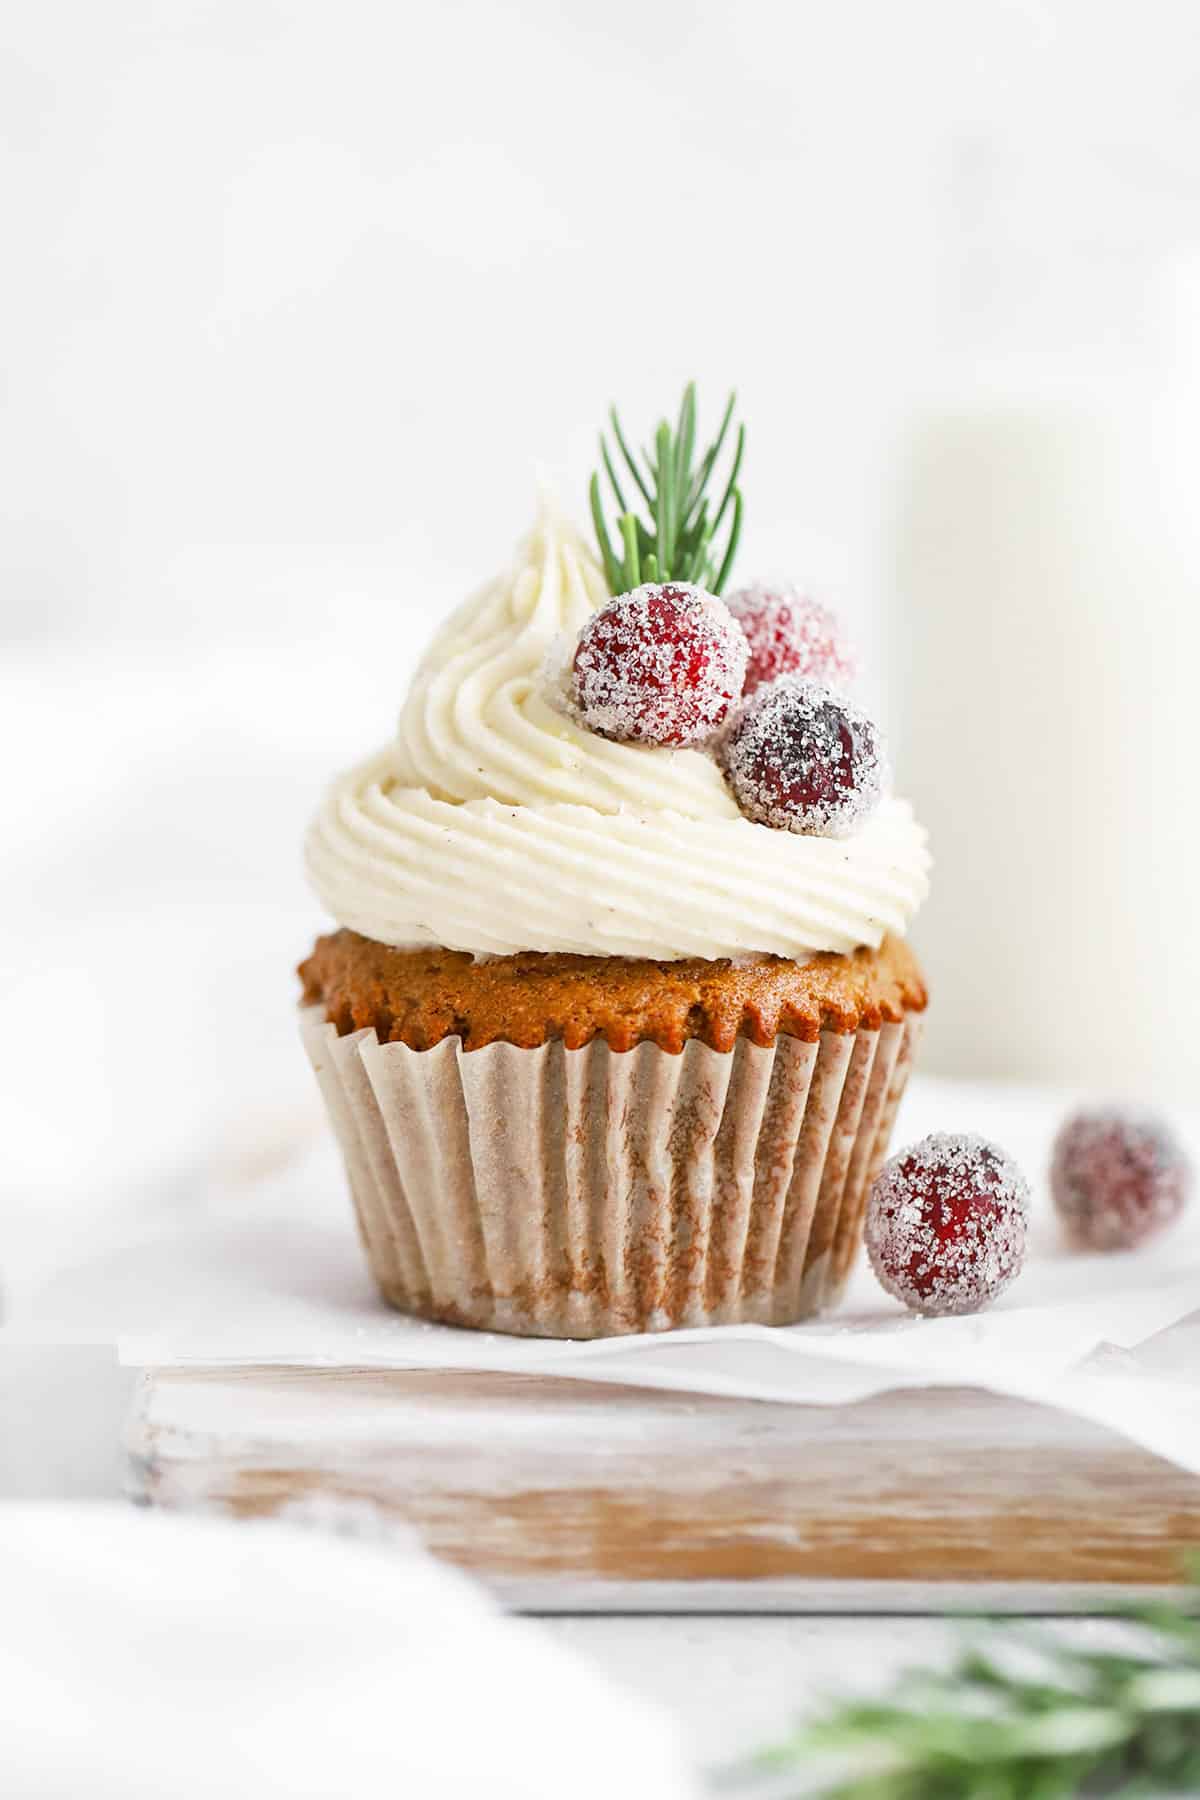 Front view of a gluten-free gingerbread cupcake topped with cream cheese, sugared cranberries, and rosemary